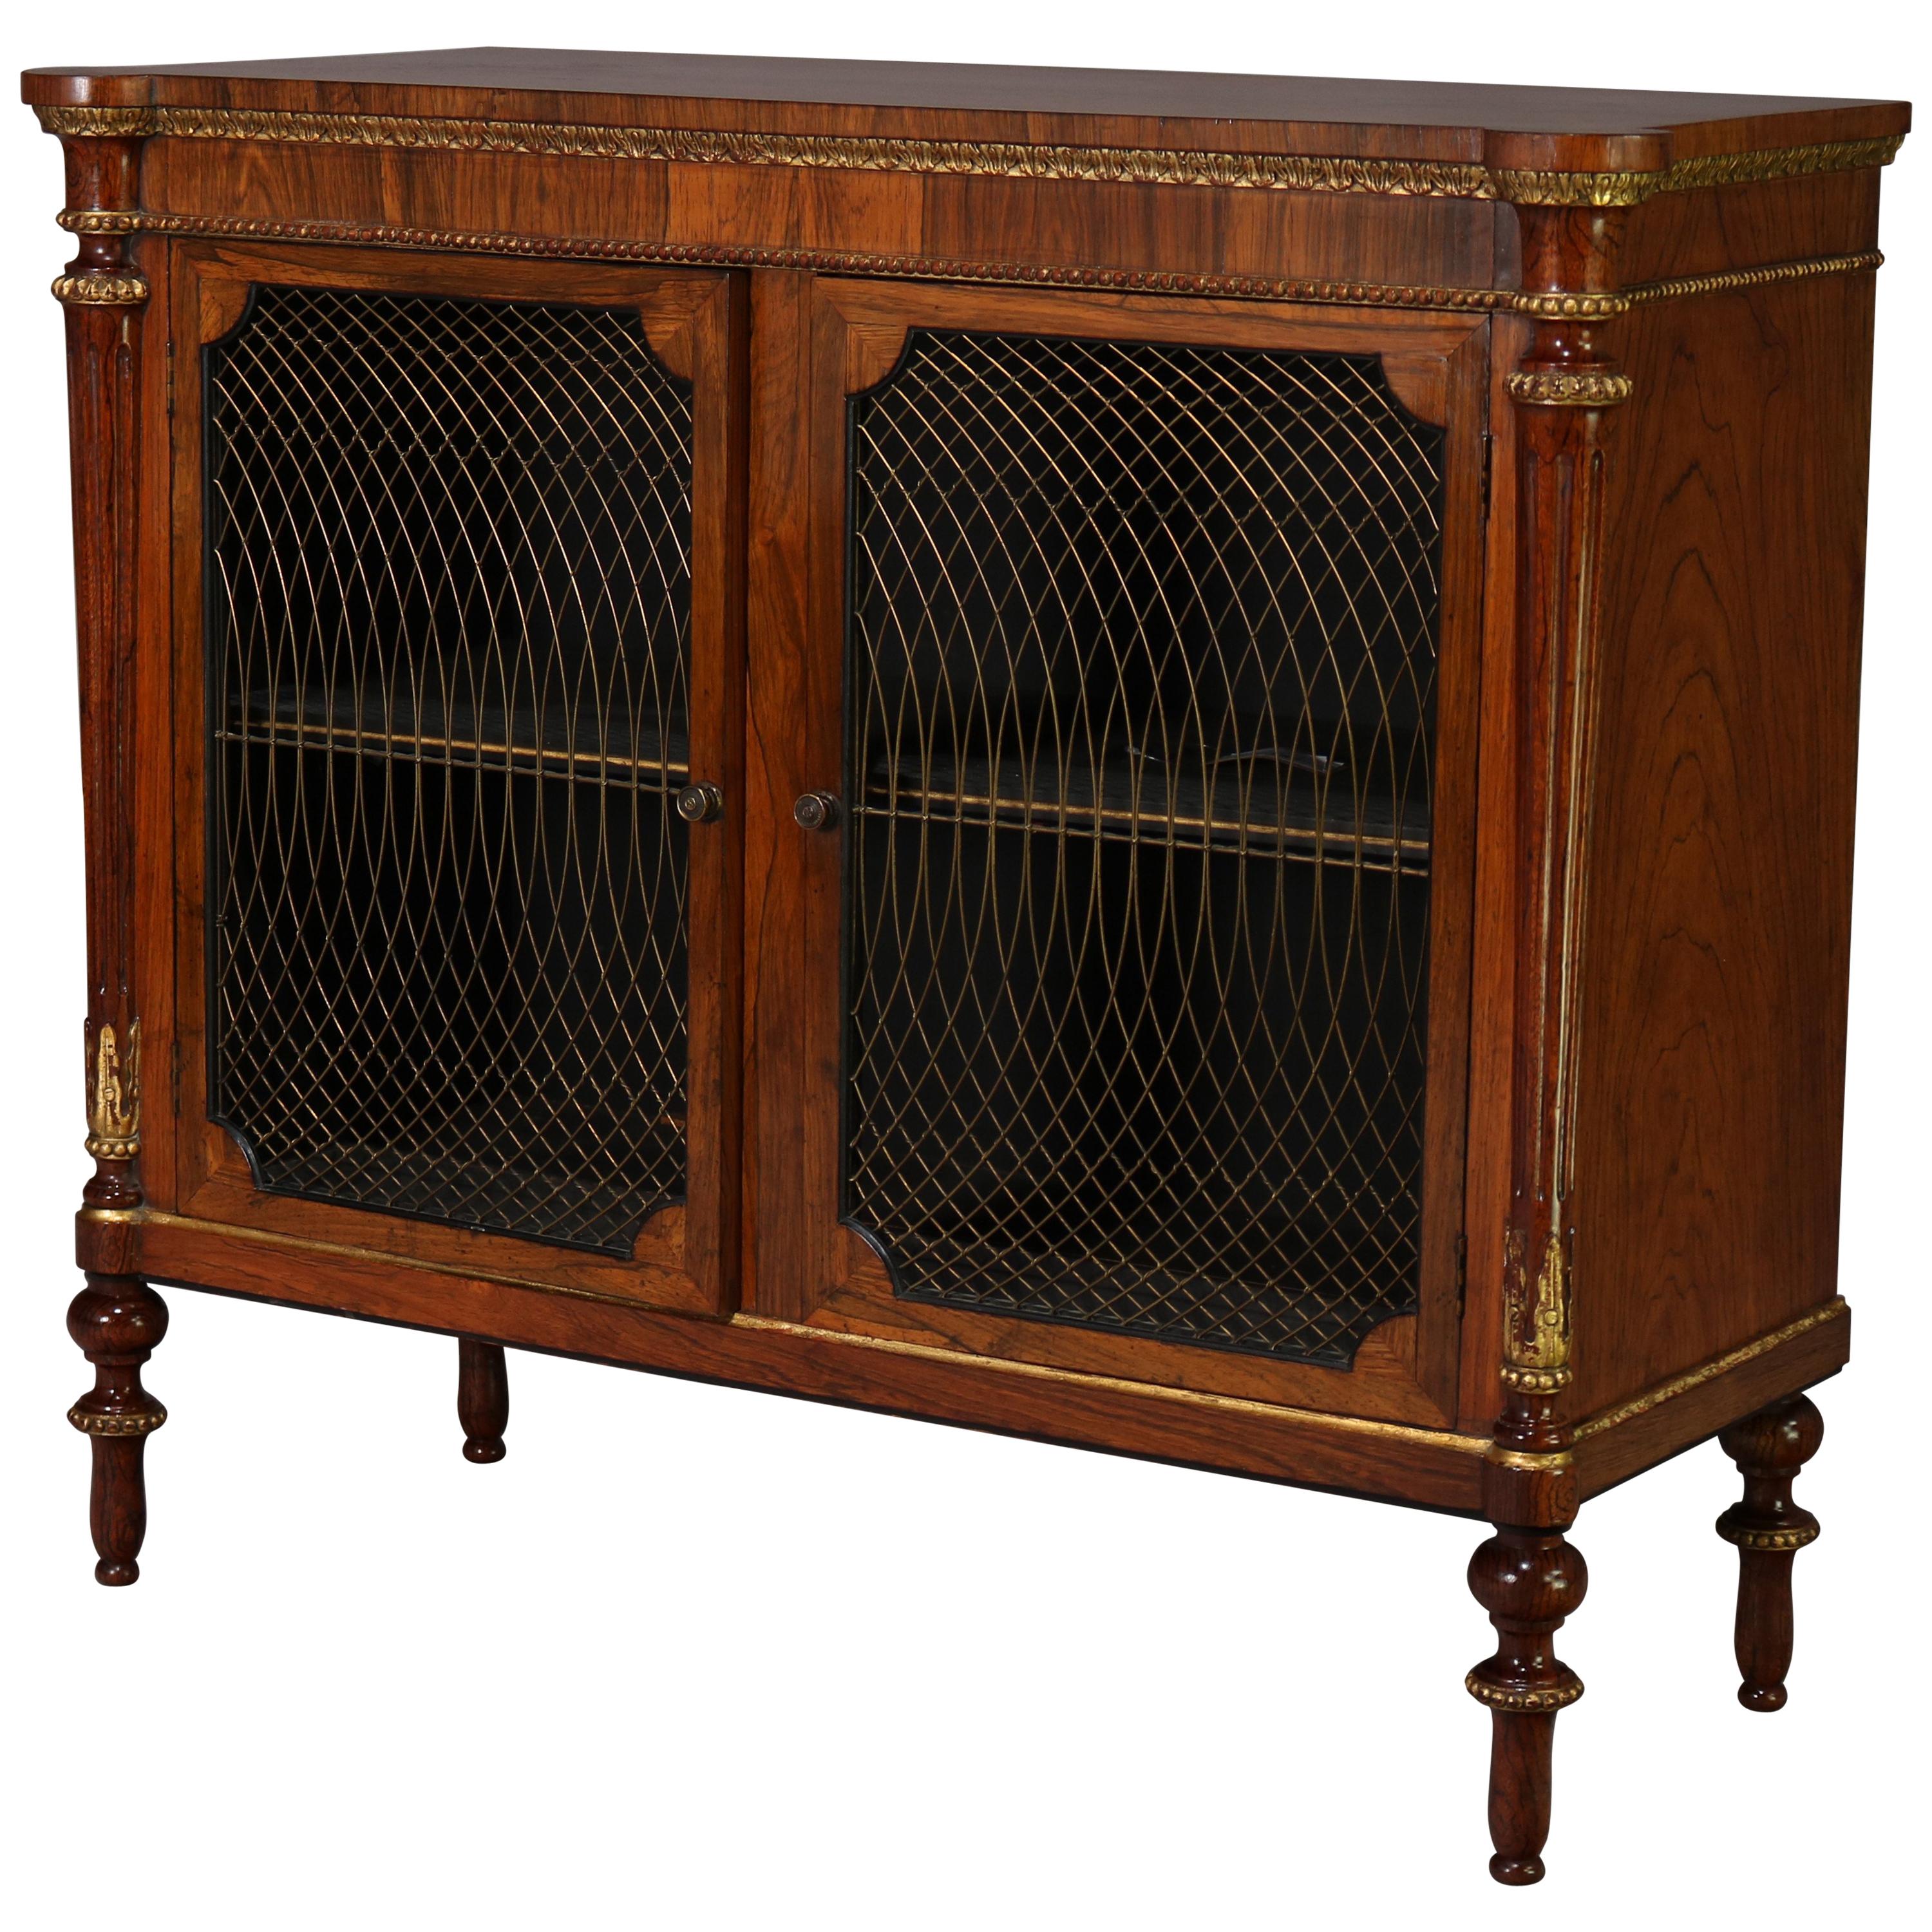 Antique English Regency Style Rosewood, Mesh and Gilt Two-Door Credenza